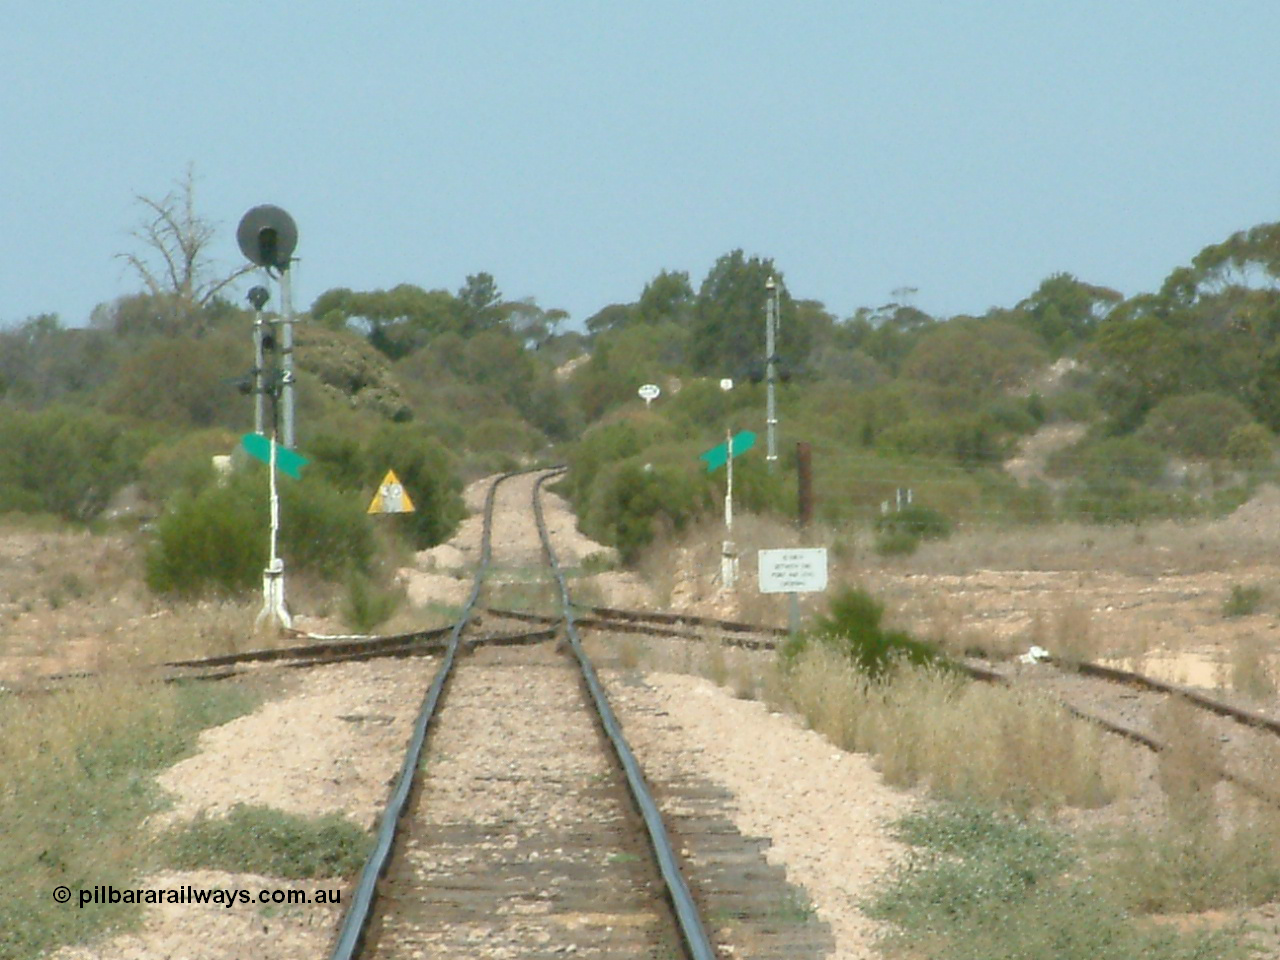 030405 140102
Kyancutta, yard view looking south along the narrow gauge mainline with the siding point levers and indicators with the Eyre Highway grade crossing and one of only three electrically lit signals on the Eyre Peninsula Division. The cast iron 'Yard Limit' sign can be made out in the distance, 5th April 2003.
